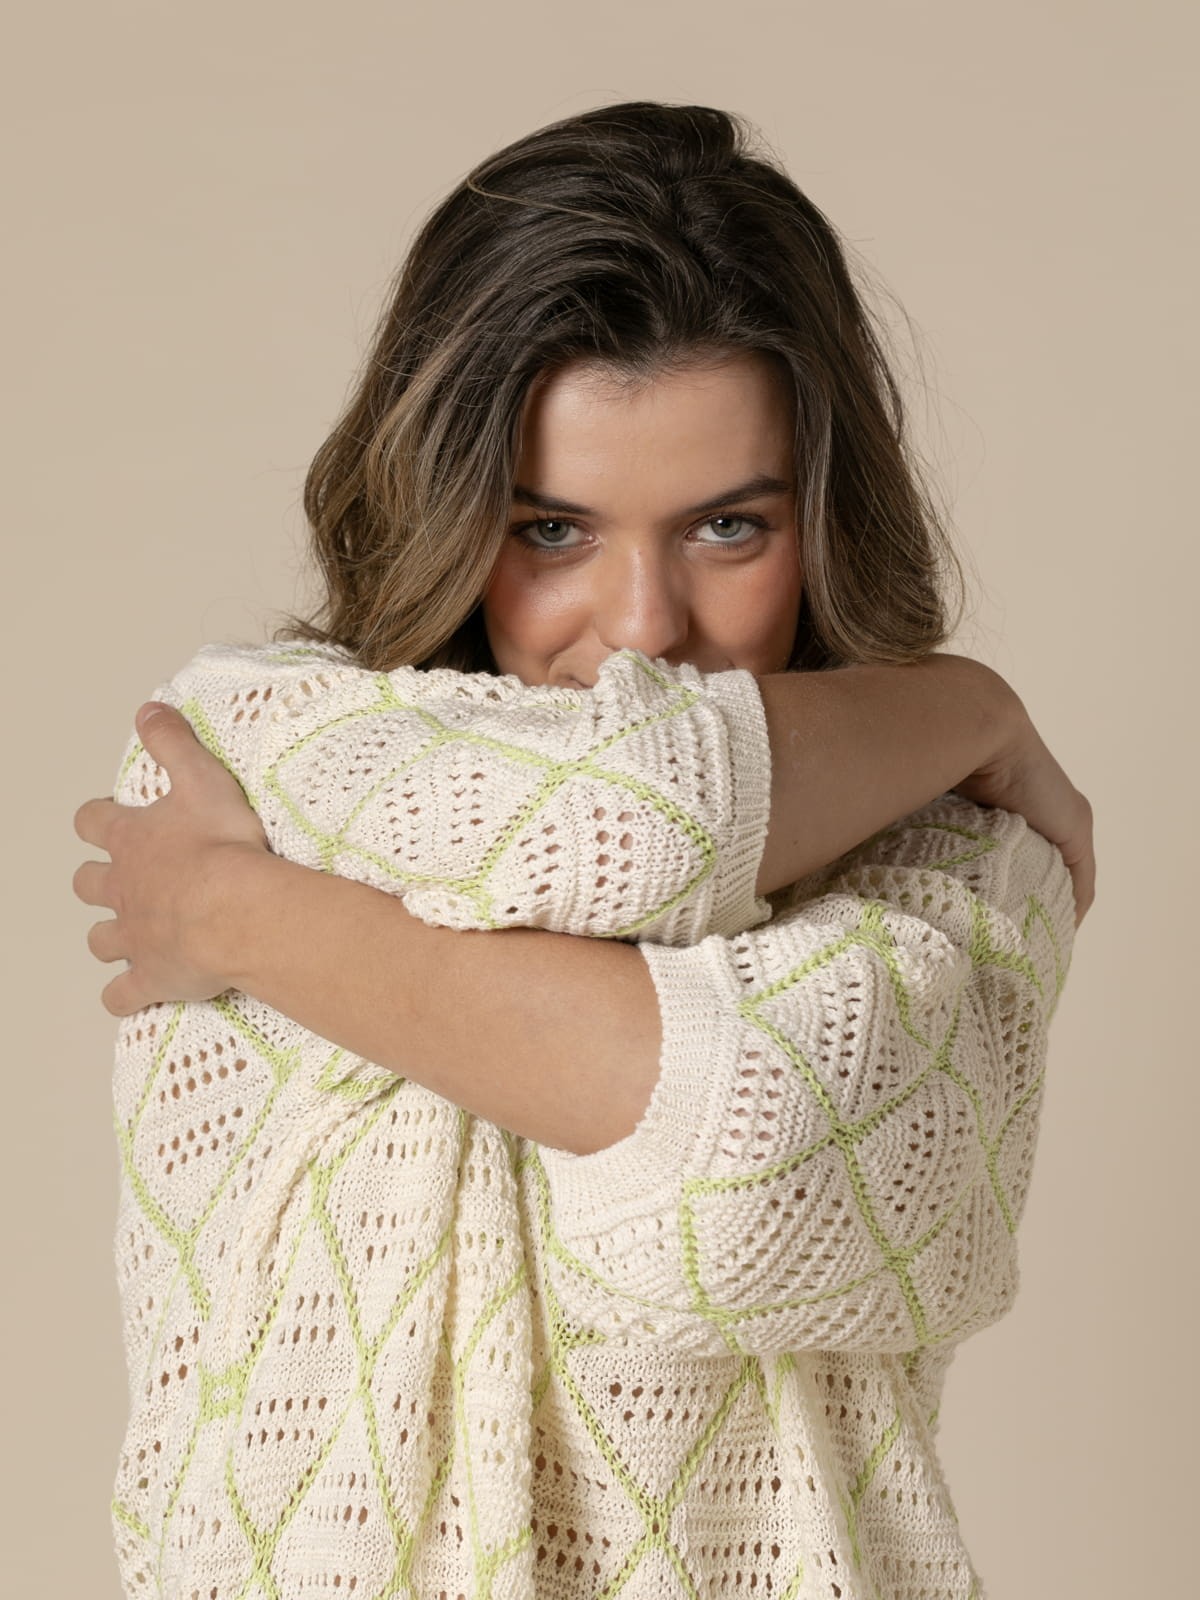 Woman Sweater with white rhombuses Limacolour